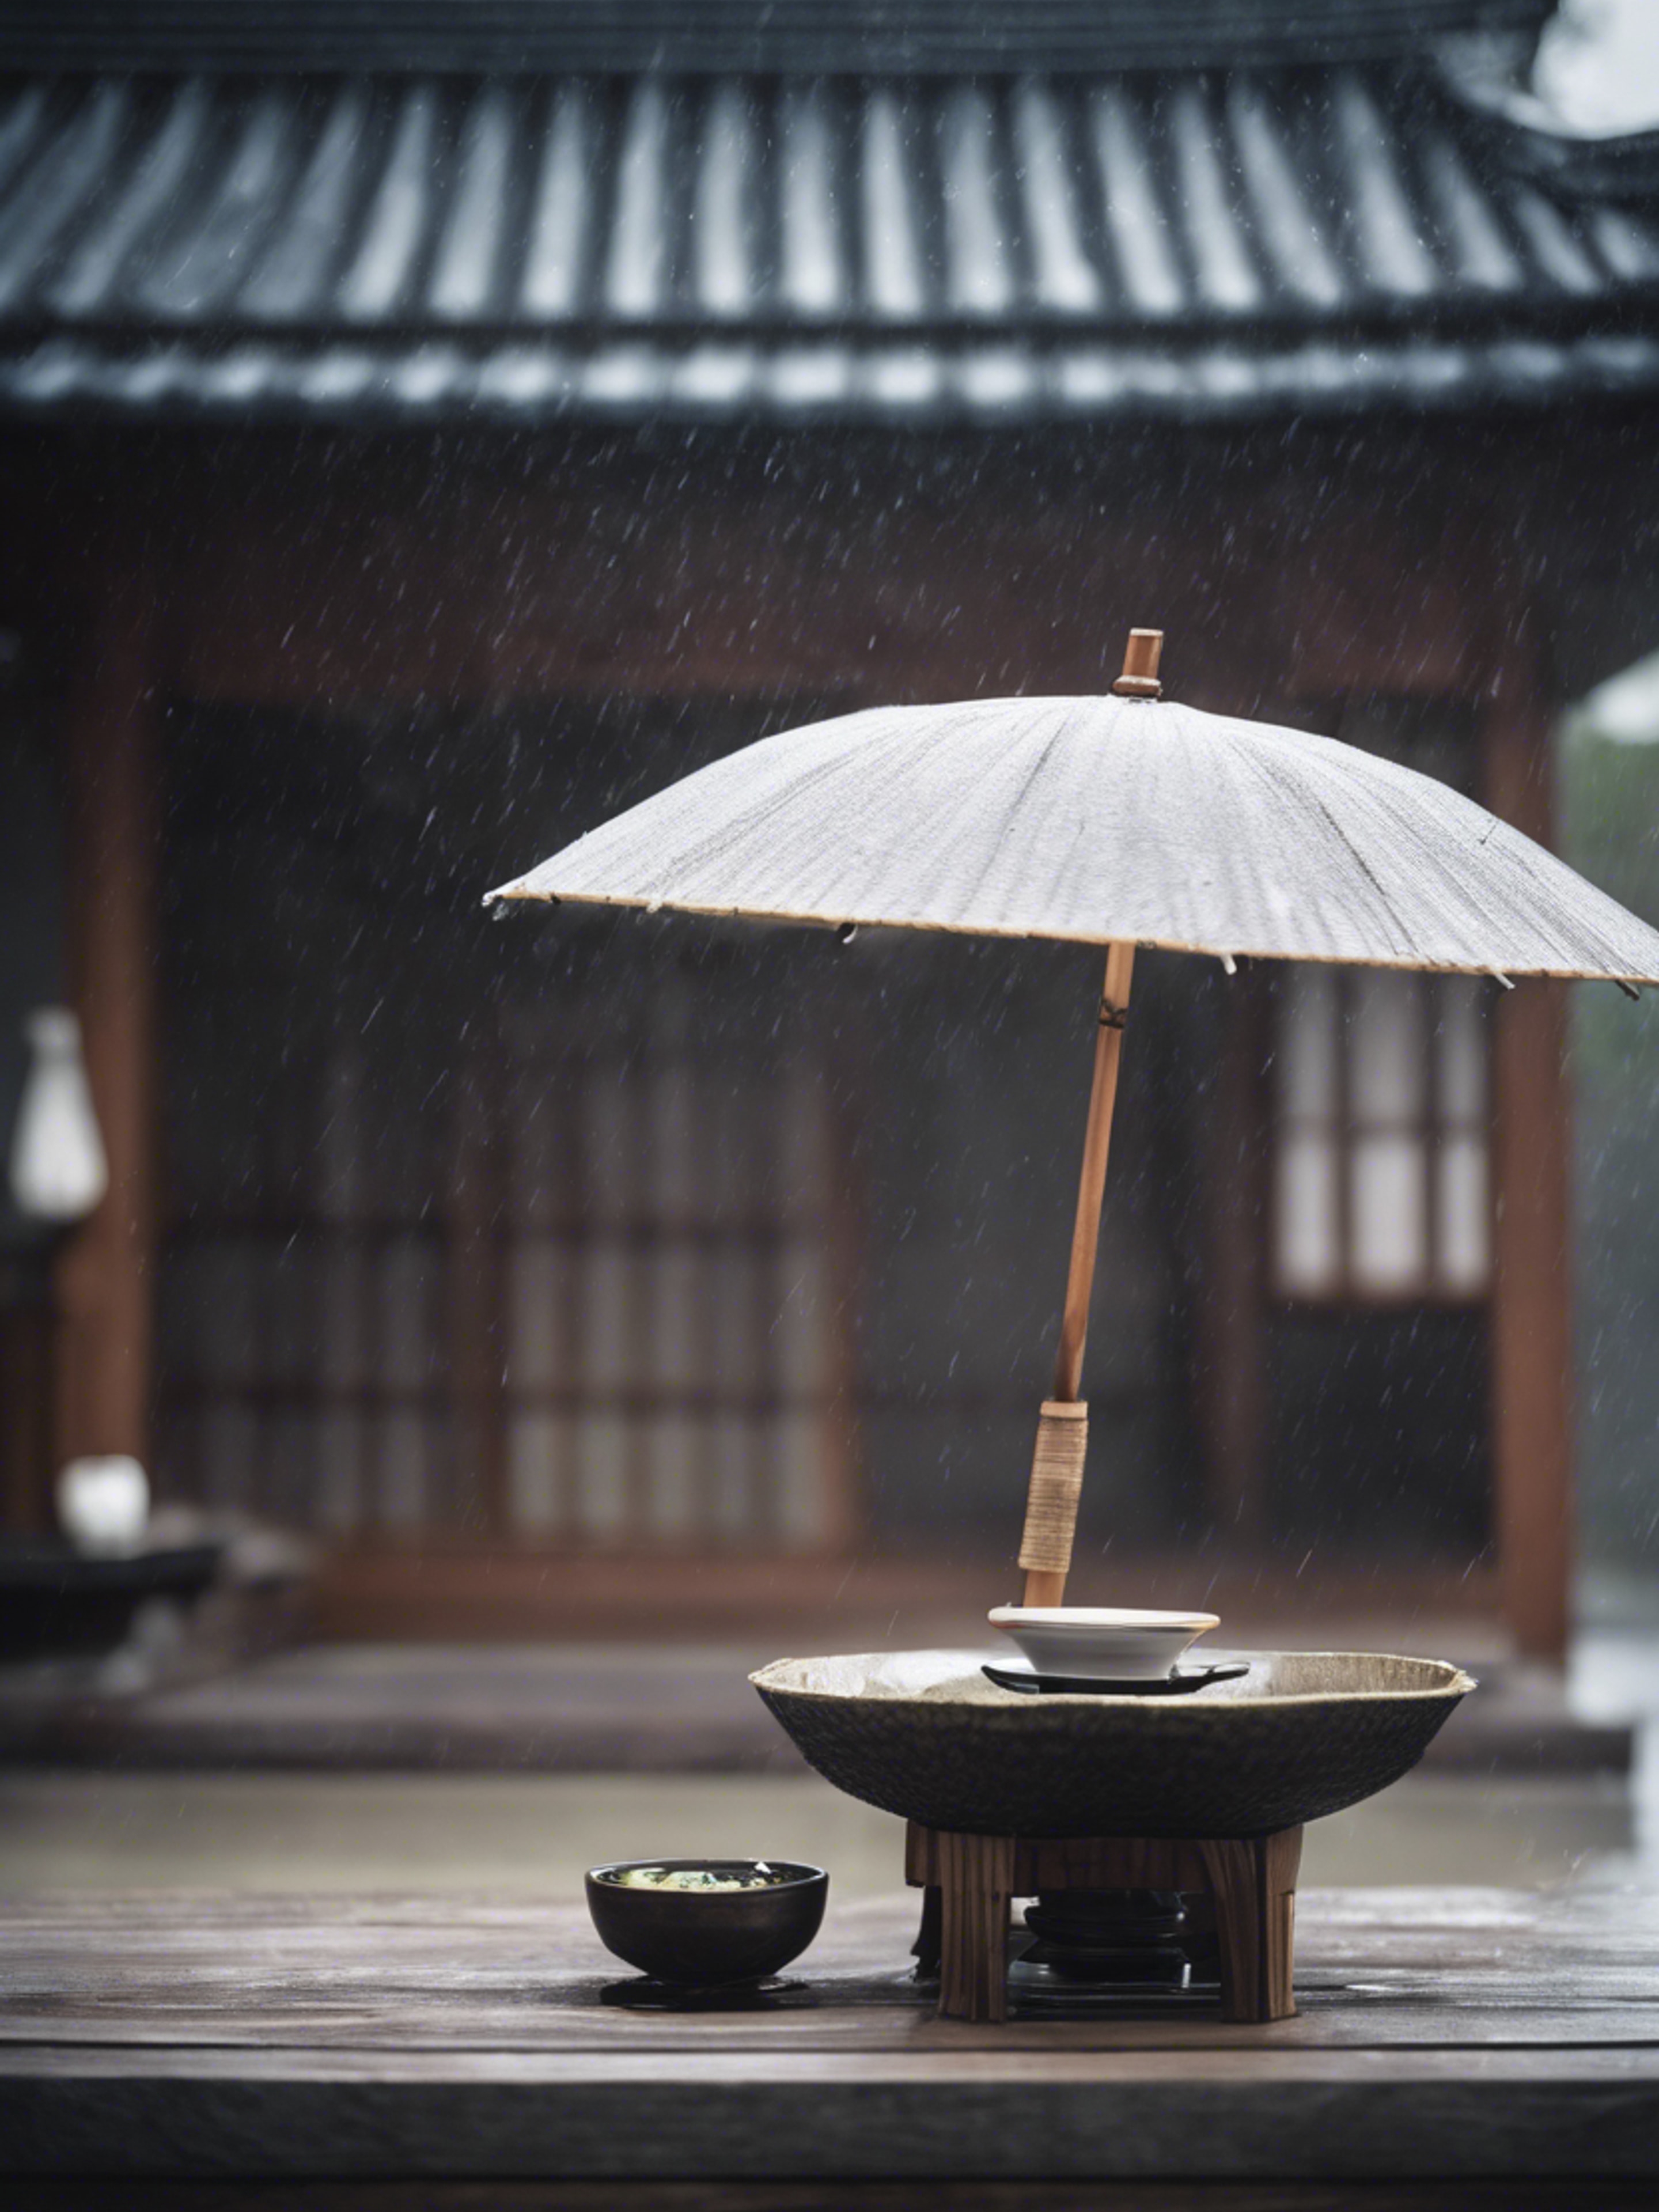 A melancholic depiction of a solo Japanese tea ceremony being performed on a rainy day, by a lone figure under a paper umbrella. Wallpaper[f40b8b46d18548d9b63d]